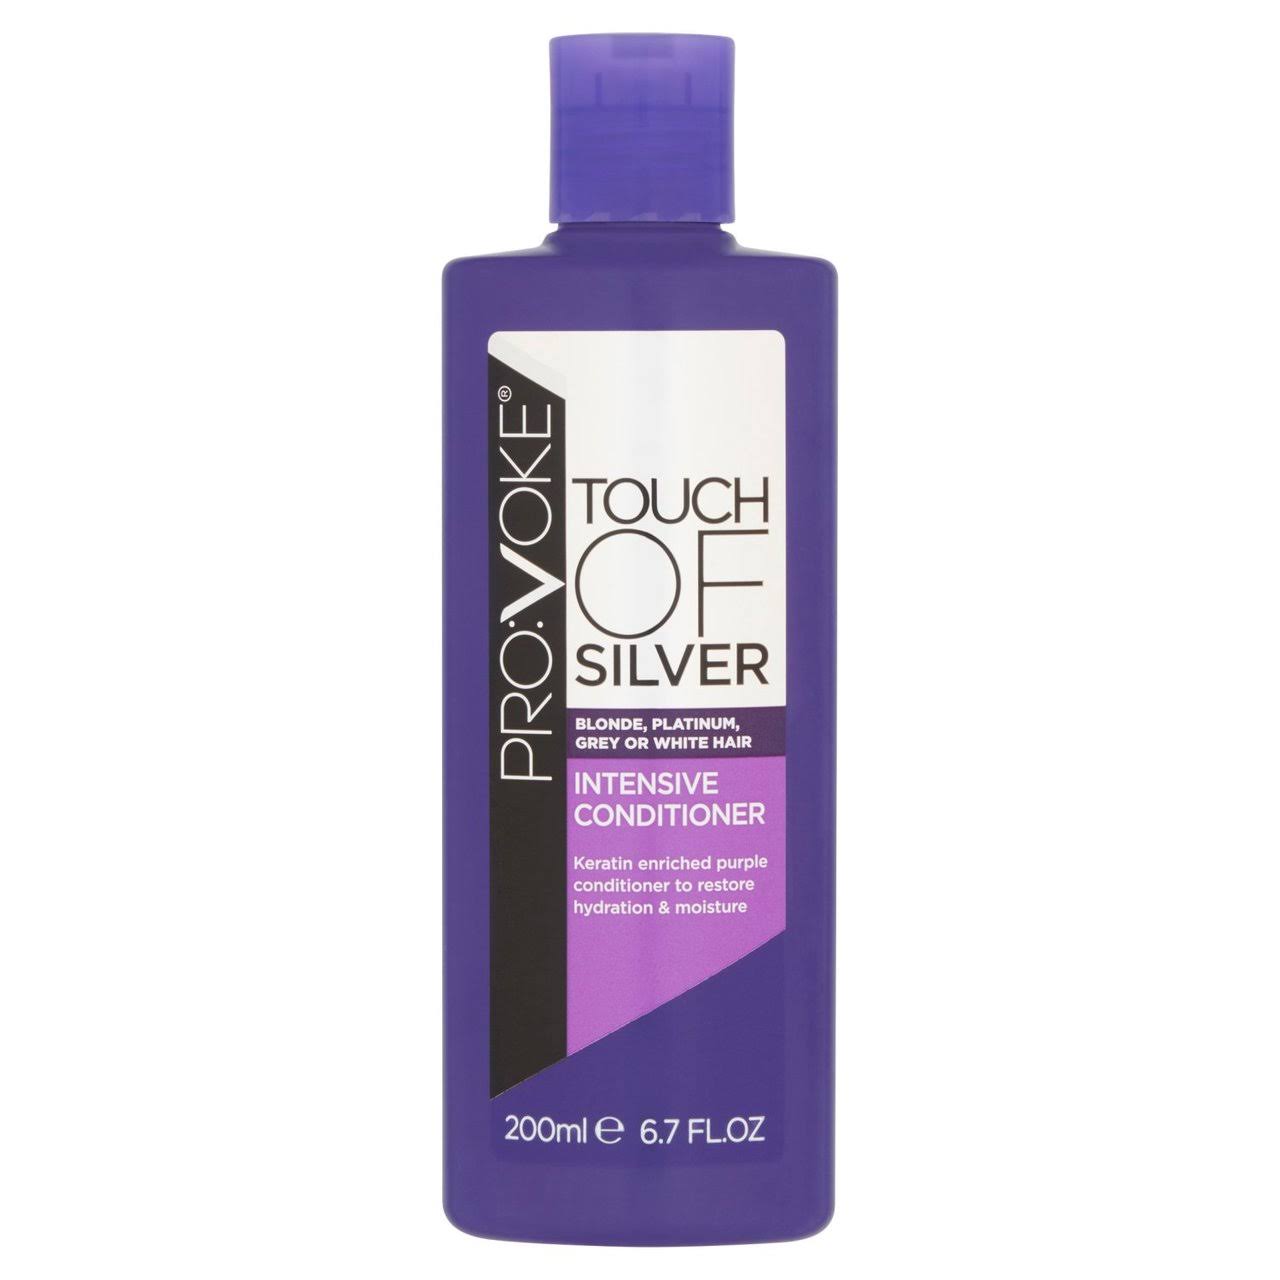 Touch Of Silver Intensive Conditioner 200ml by dpharmacy